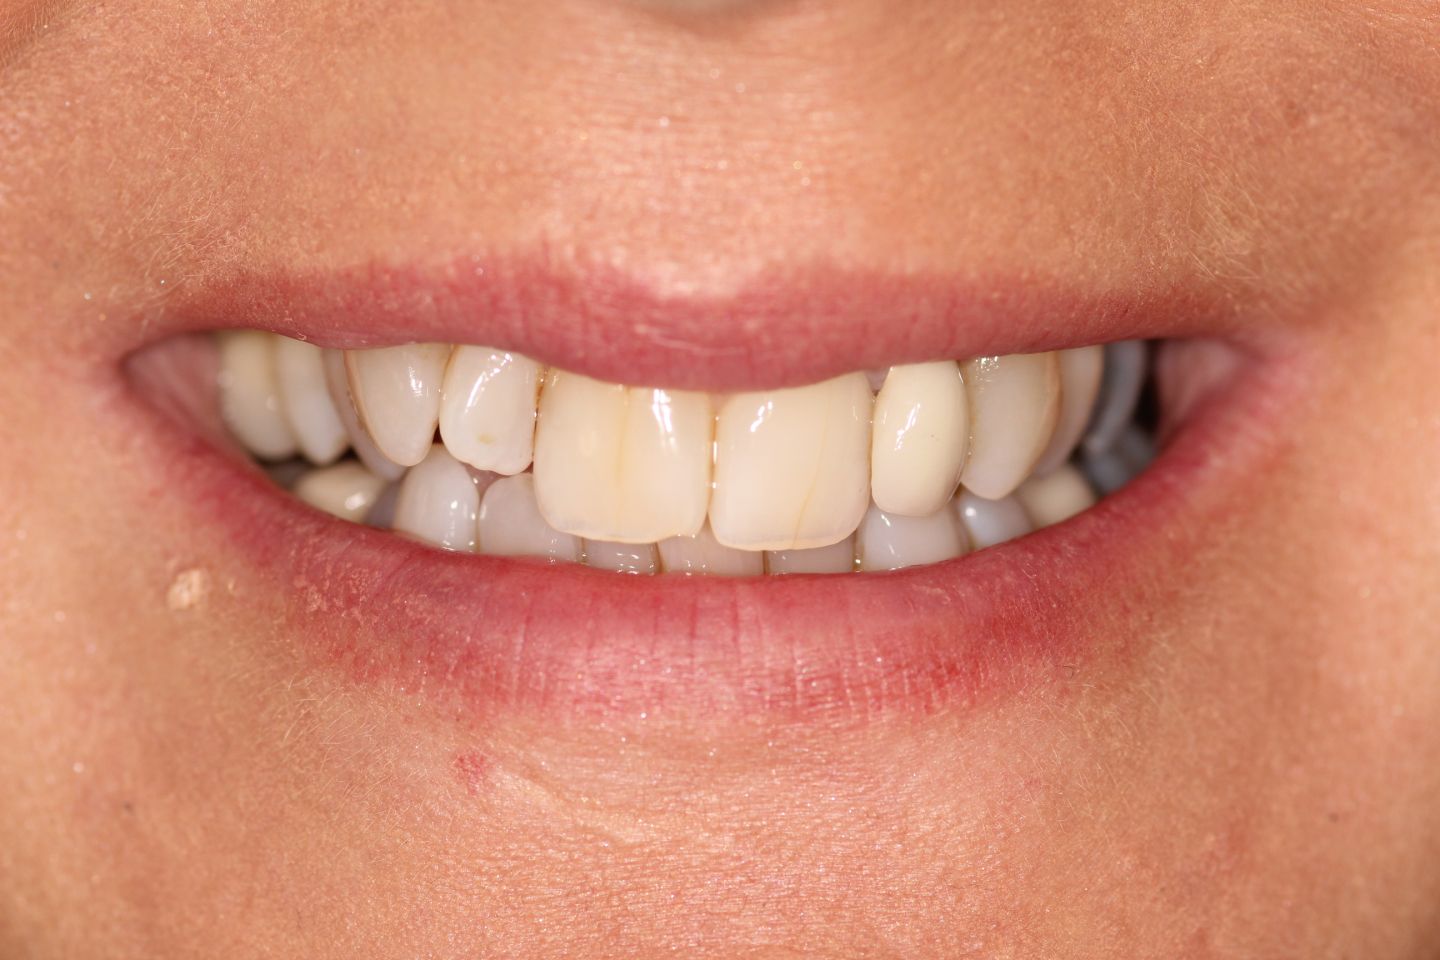 Fiona - Hygiene, Invisalign, white fillings, whitening and crowns